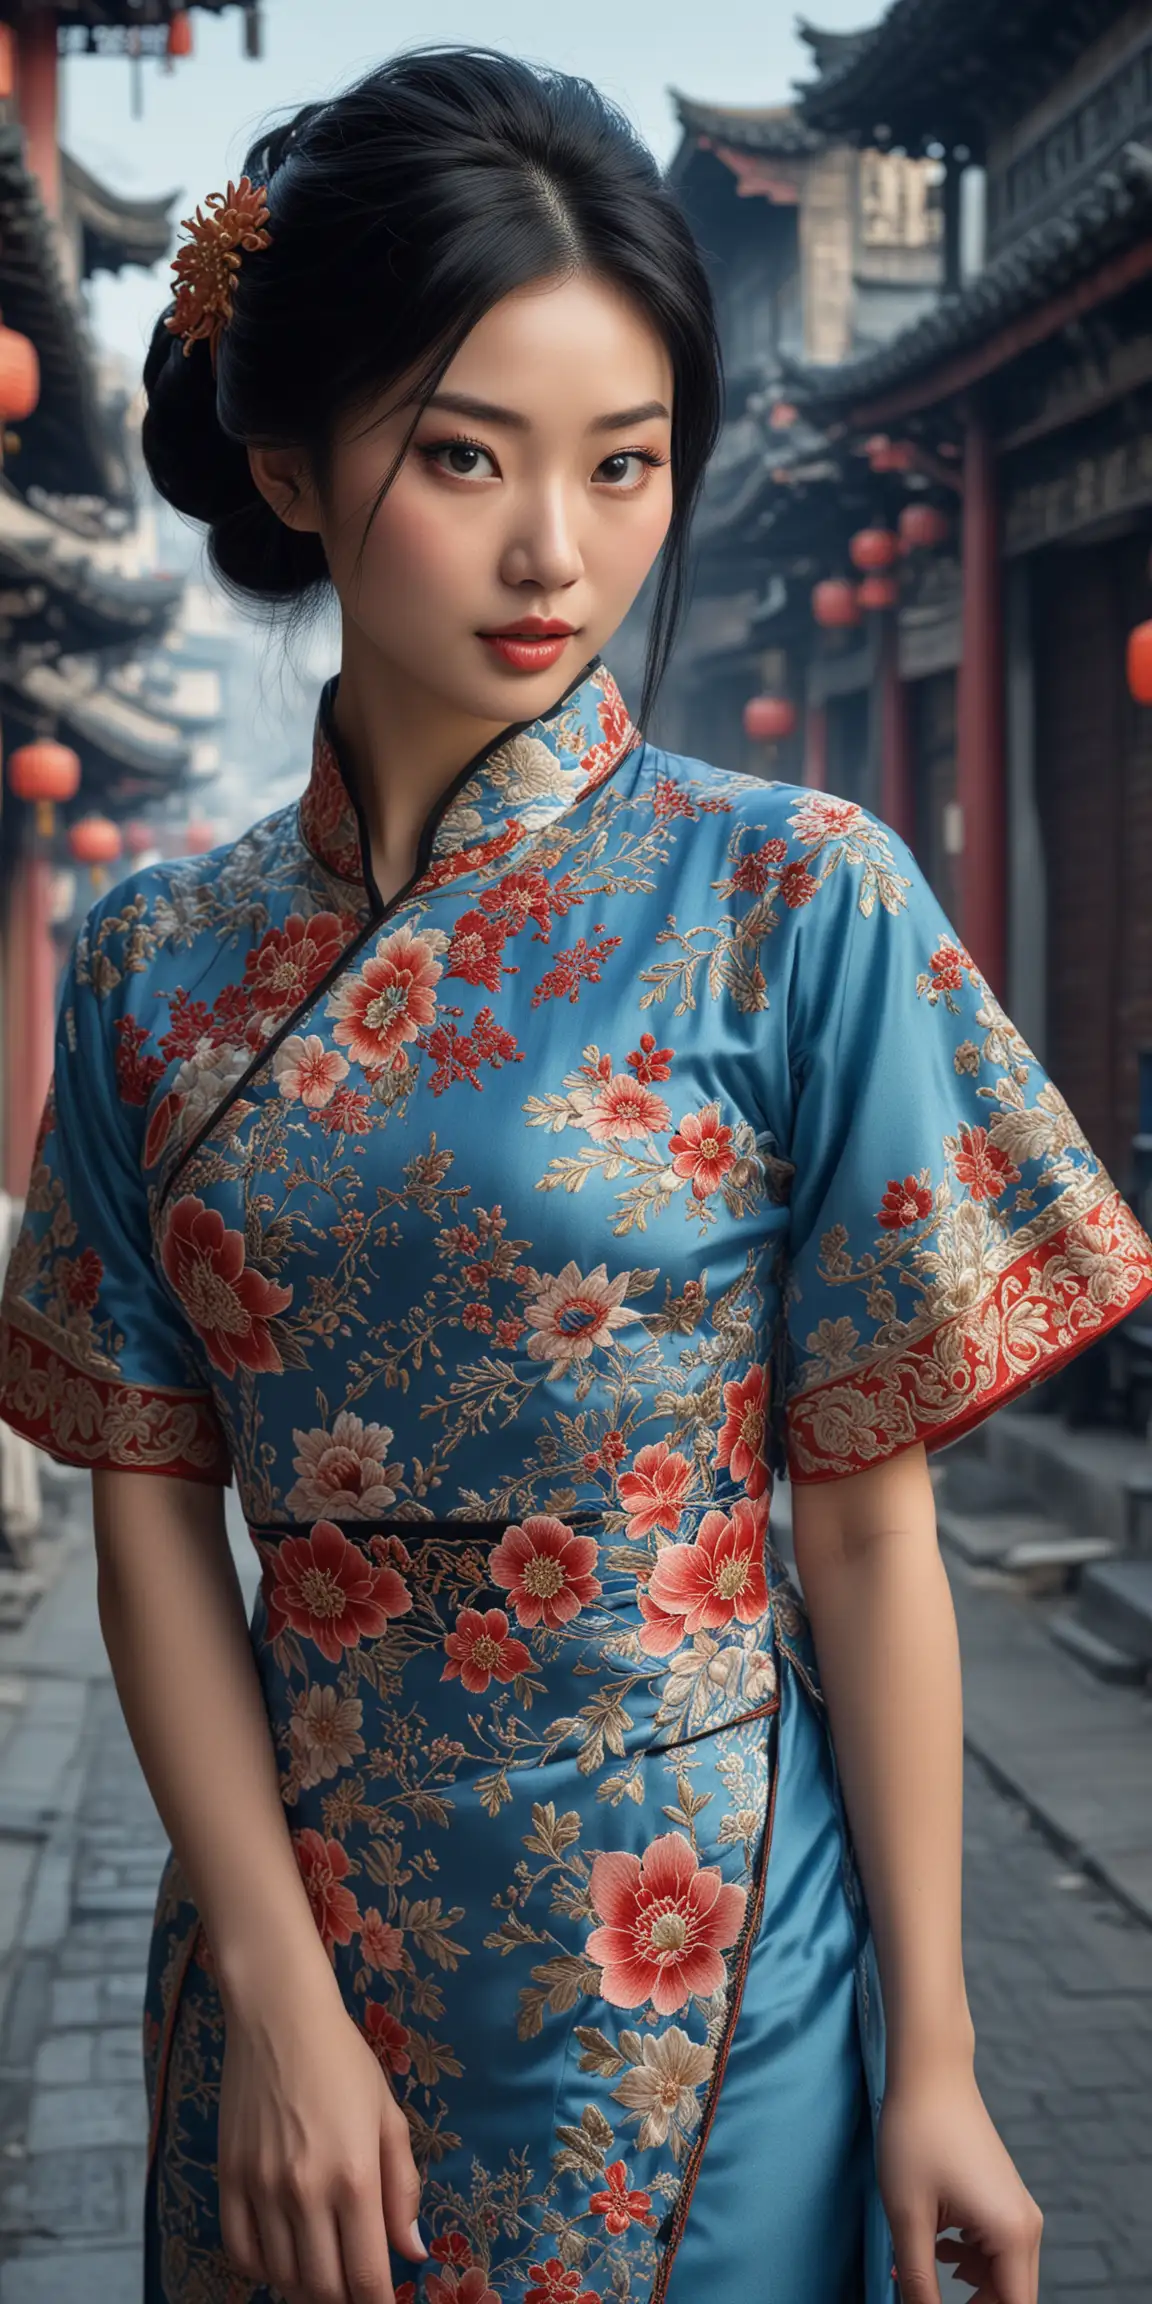 a Chinese woman captivates him with her rare beauty. Her jet-black hair frames her perfect porcelain face, and her striking feature is her eyes – blue as the sky at dawn. Her outfit, a scarlet qipao decorated with intricate embroidery, combines tradition with modernity. As she moves with graceful confidence through the bustling streets, her azure gaze draws admiring glances, a captivating symbol of cultural fusion and individuality. Full body photography, the cleavage line of her large breasts is visible.